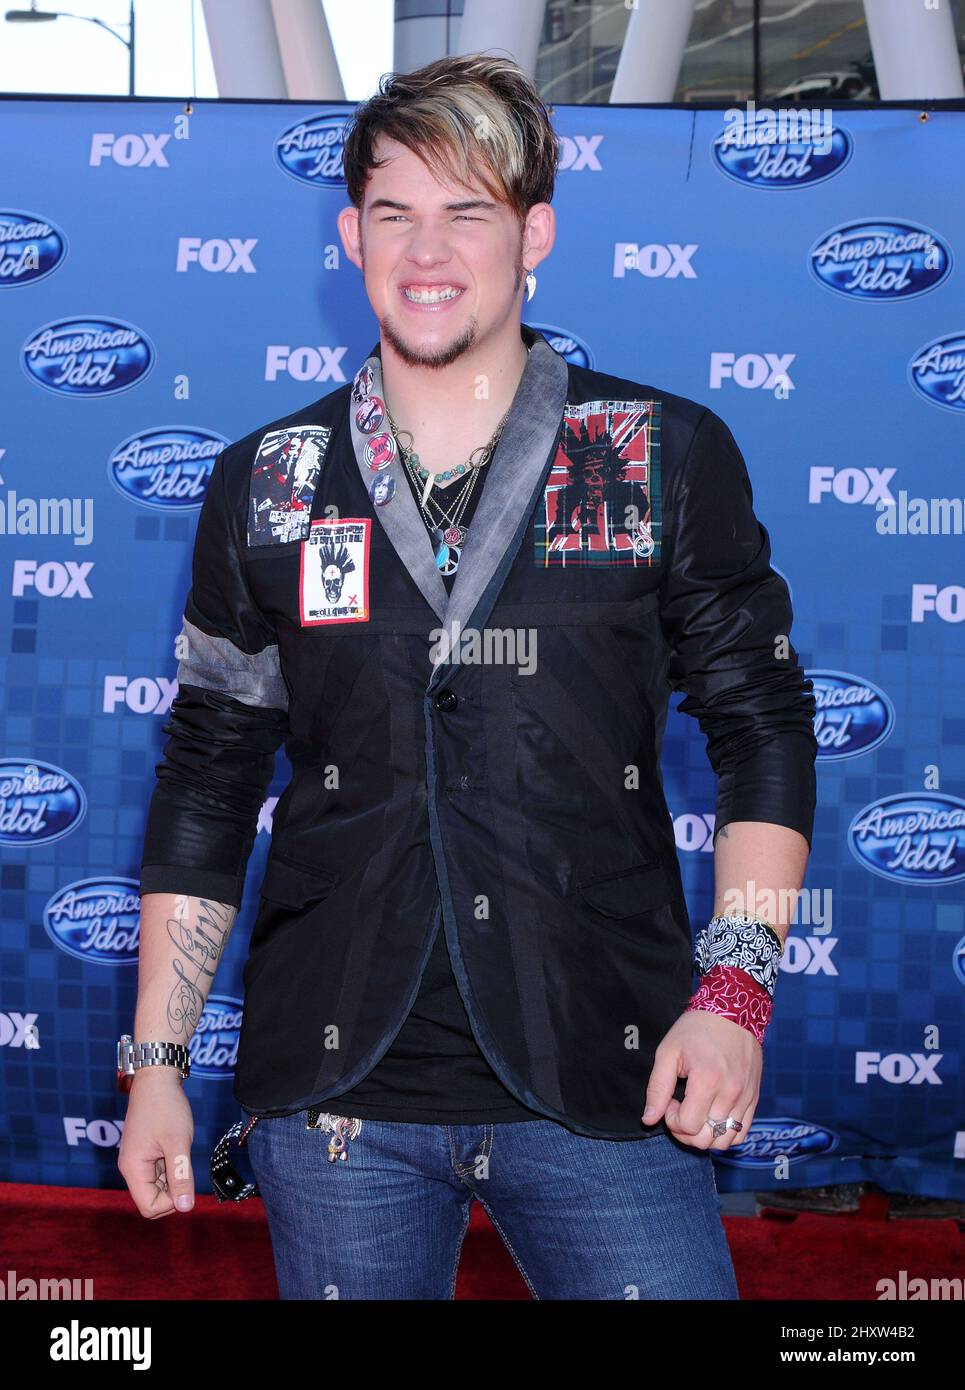 James Durbin during the American Idol Grand Finale 2011 held at Nokia Theatre L.A. Live, Los Angeles Stock Photo